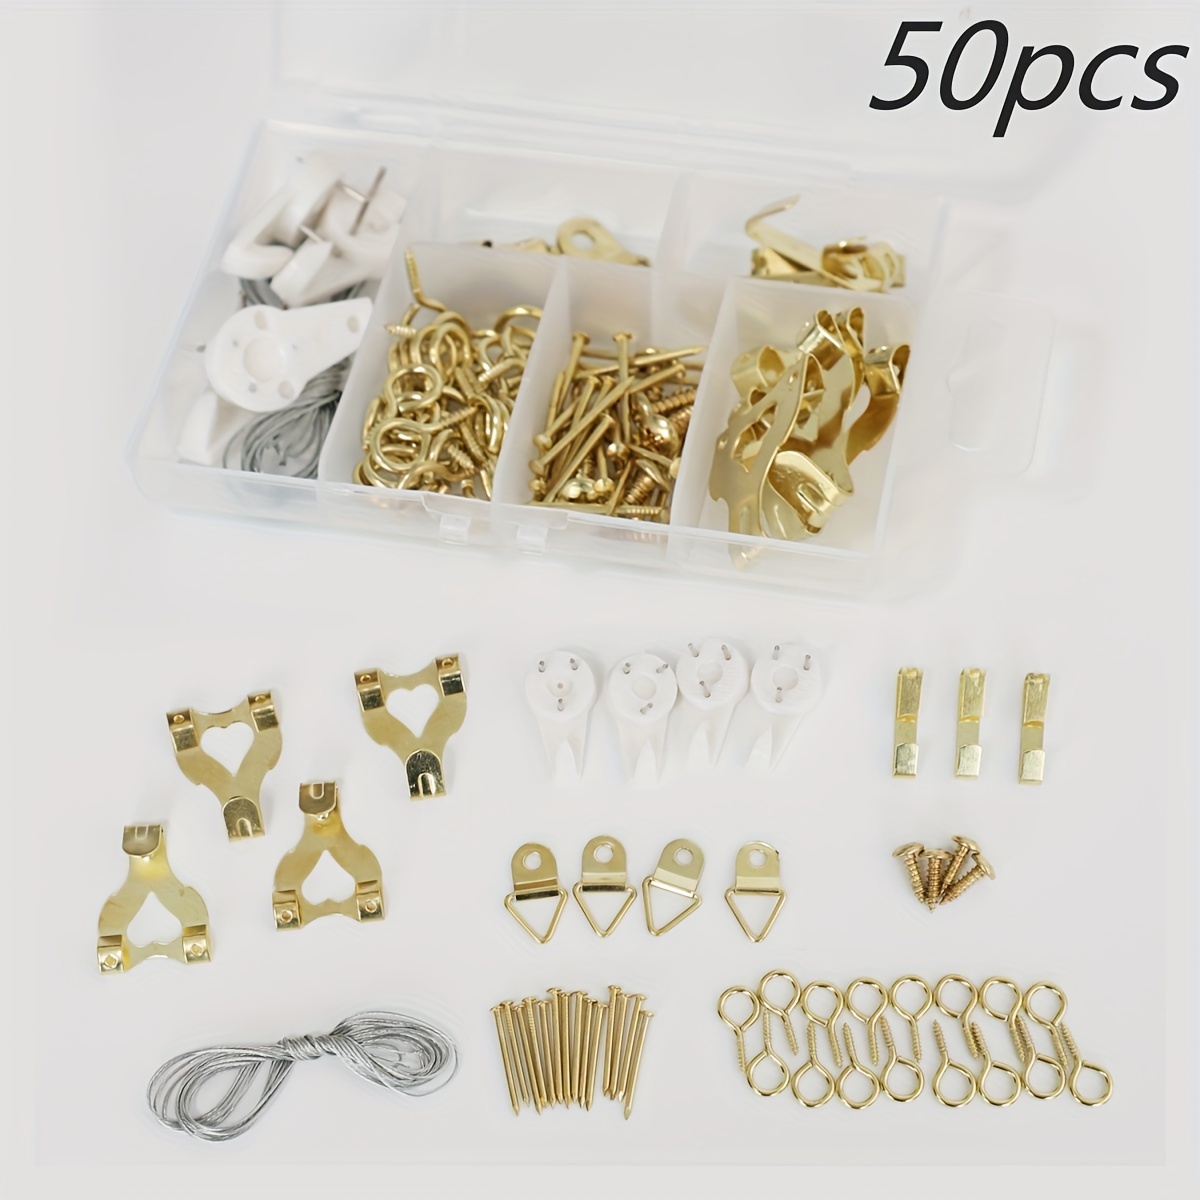 50pcs Heavy Duty Golden Hook, Light Hook, Photo Frame Hanging, Triangle  Hanging, Screw, Nail, 70.87inch Wire Rope Photo Frame Accessories Set, Home  Cl